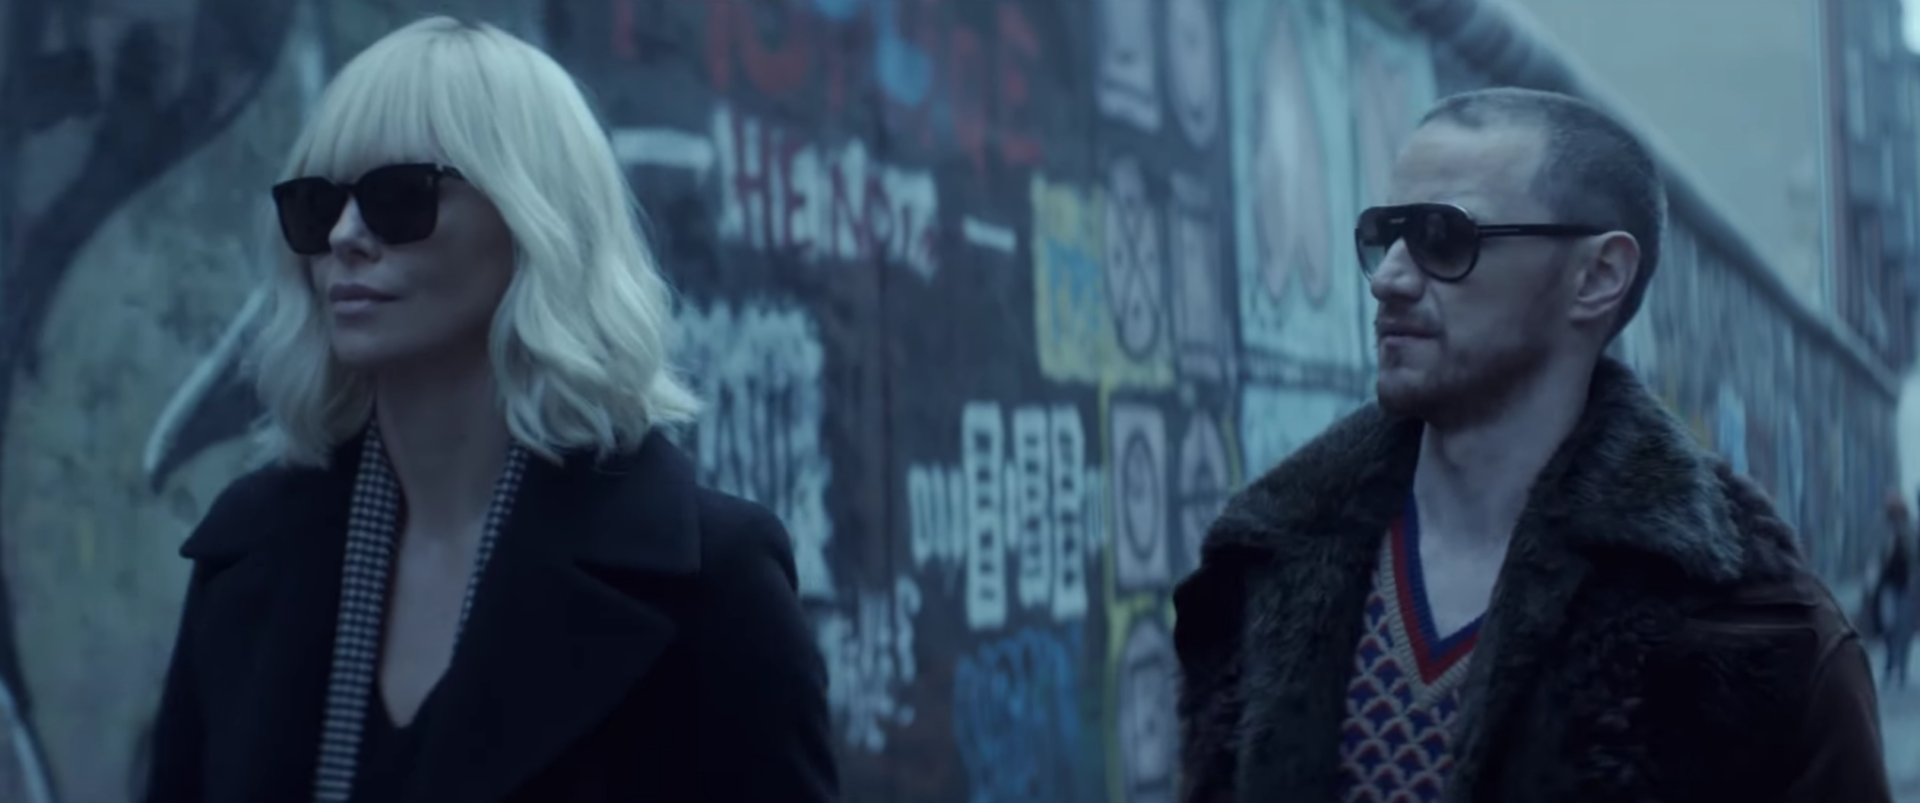 Charlize Theron shoots to kill in new ‘Atomic Blonde’ trailer